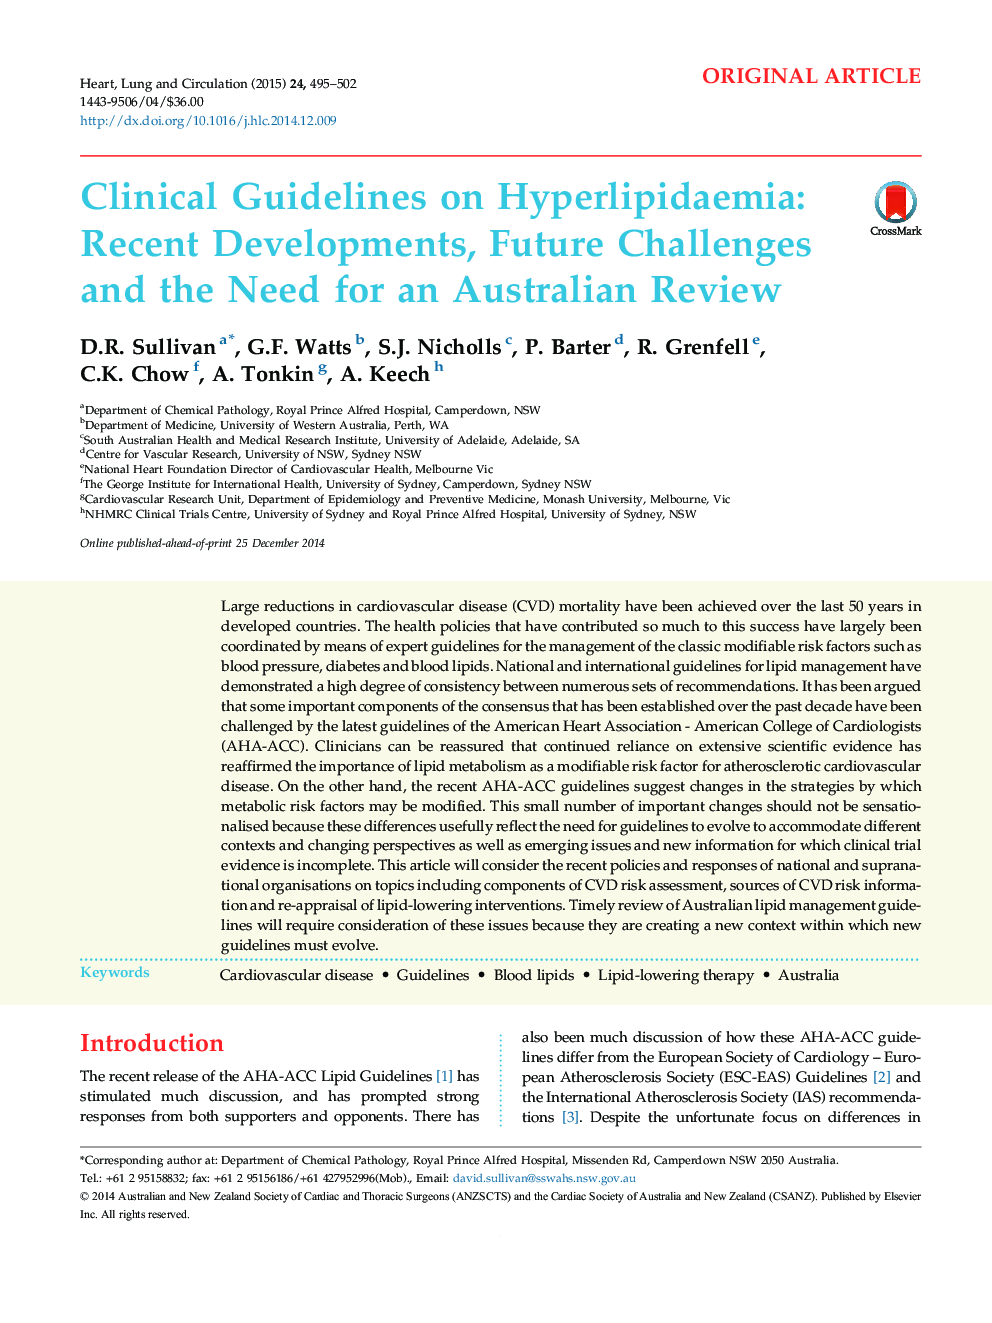 Clinical Guidelines on Hyperlipidaemia: Recent Developments, Future Challenges and the Need for an Australian Review